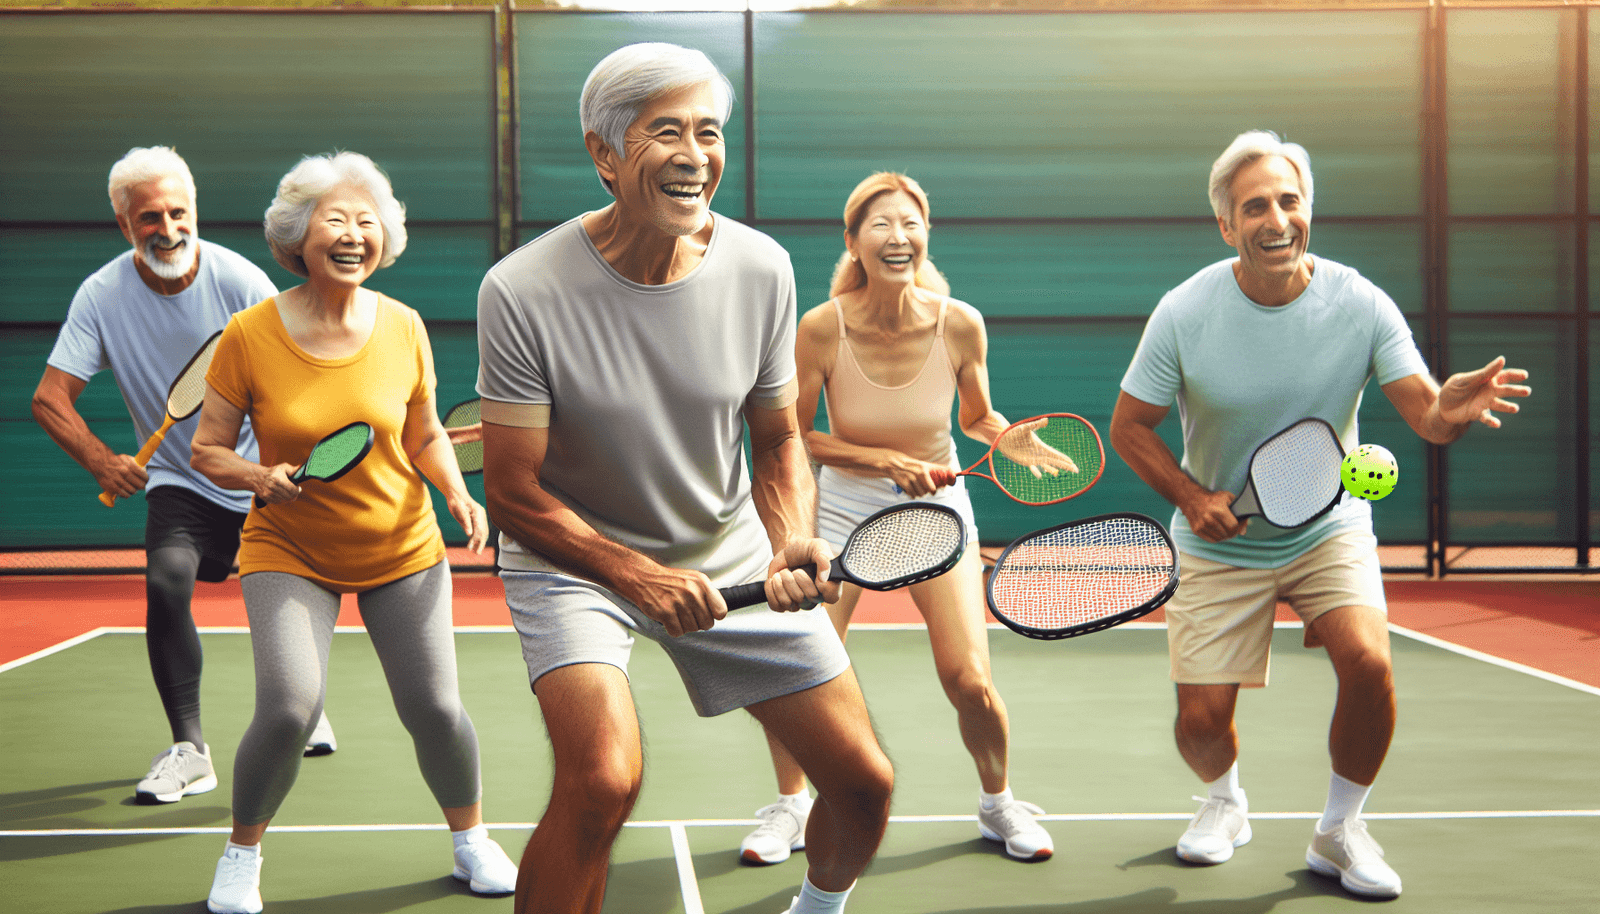 Why Pickleball Is Great For Seniors